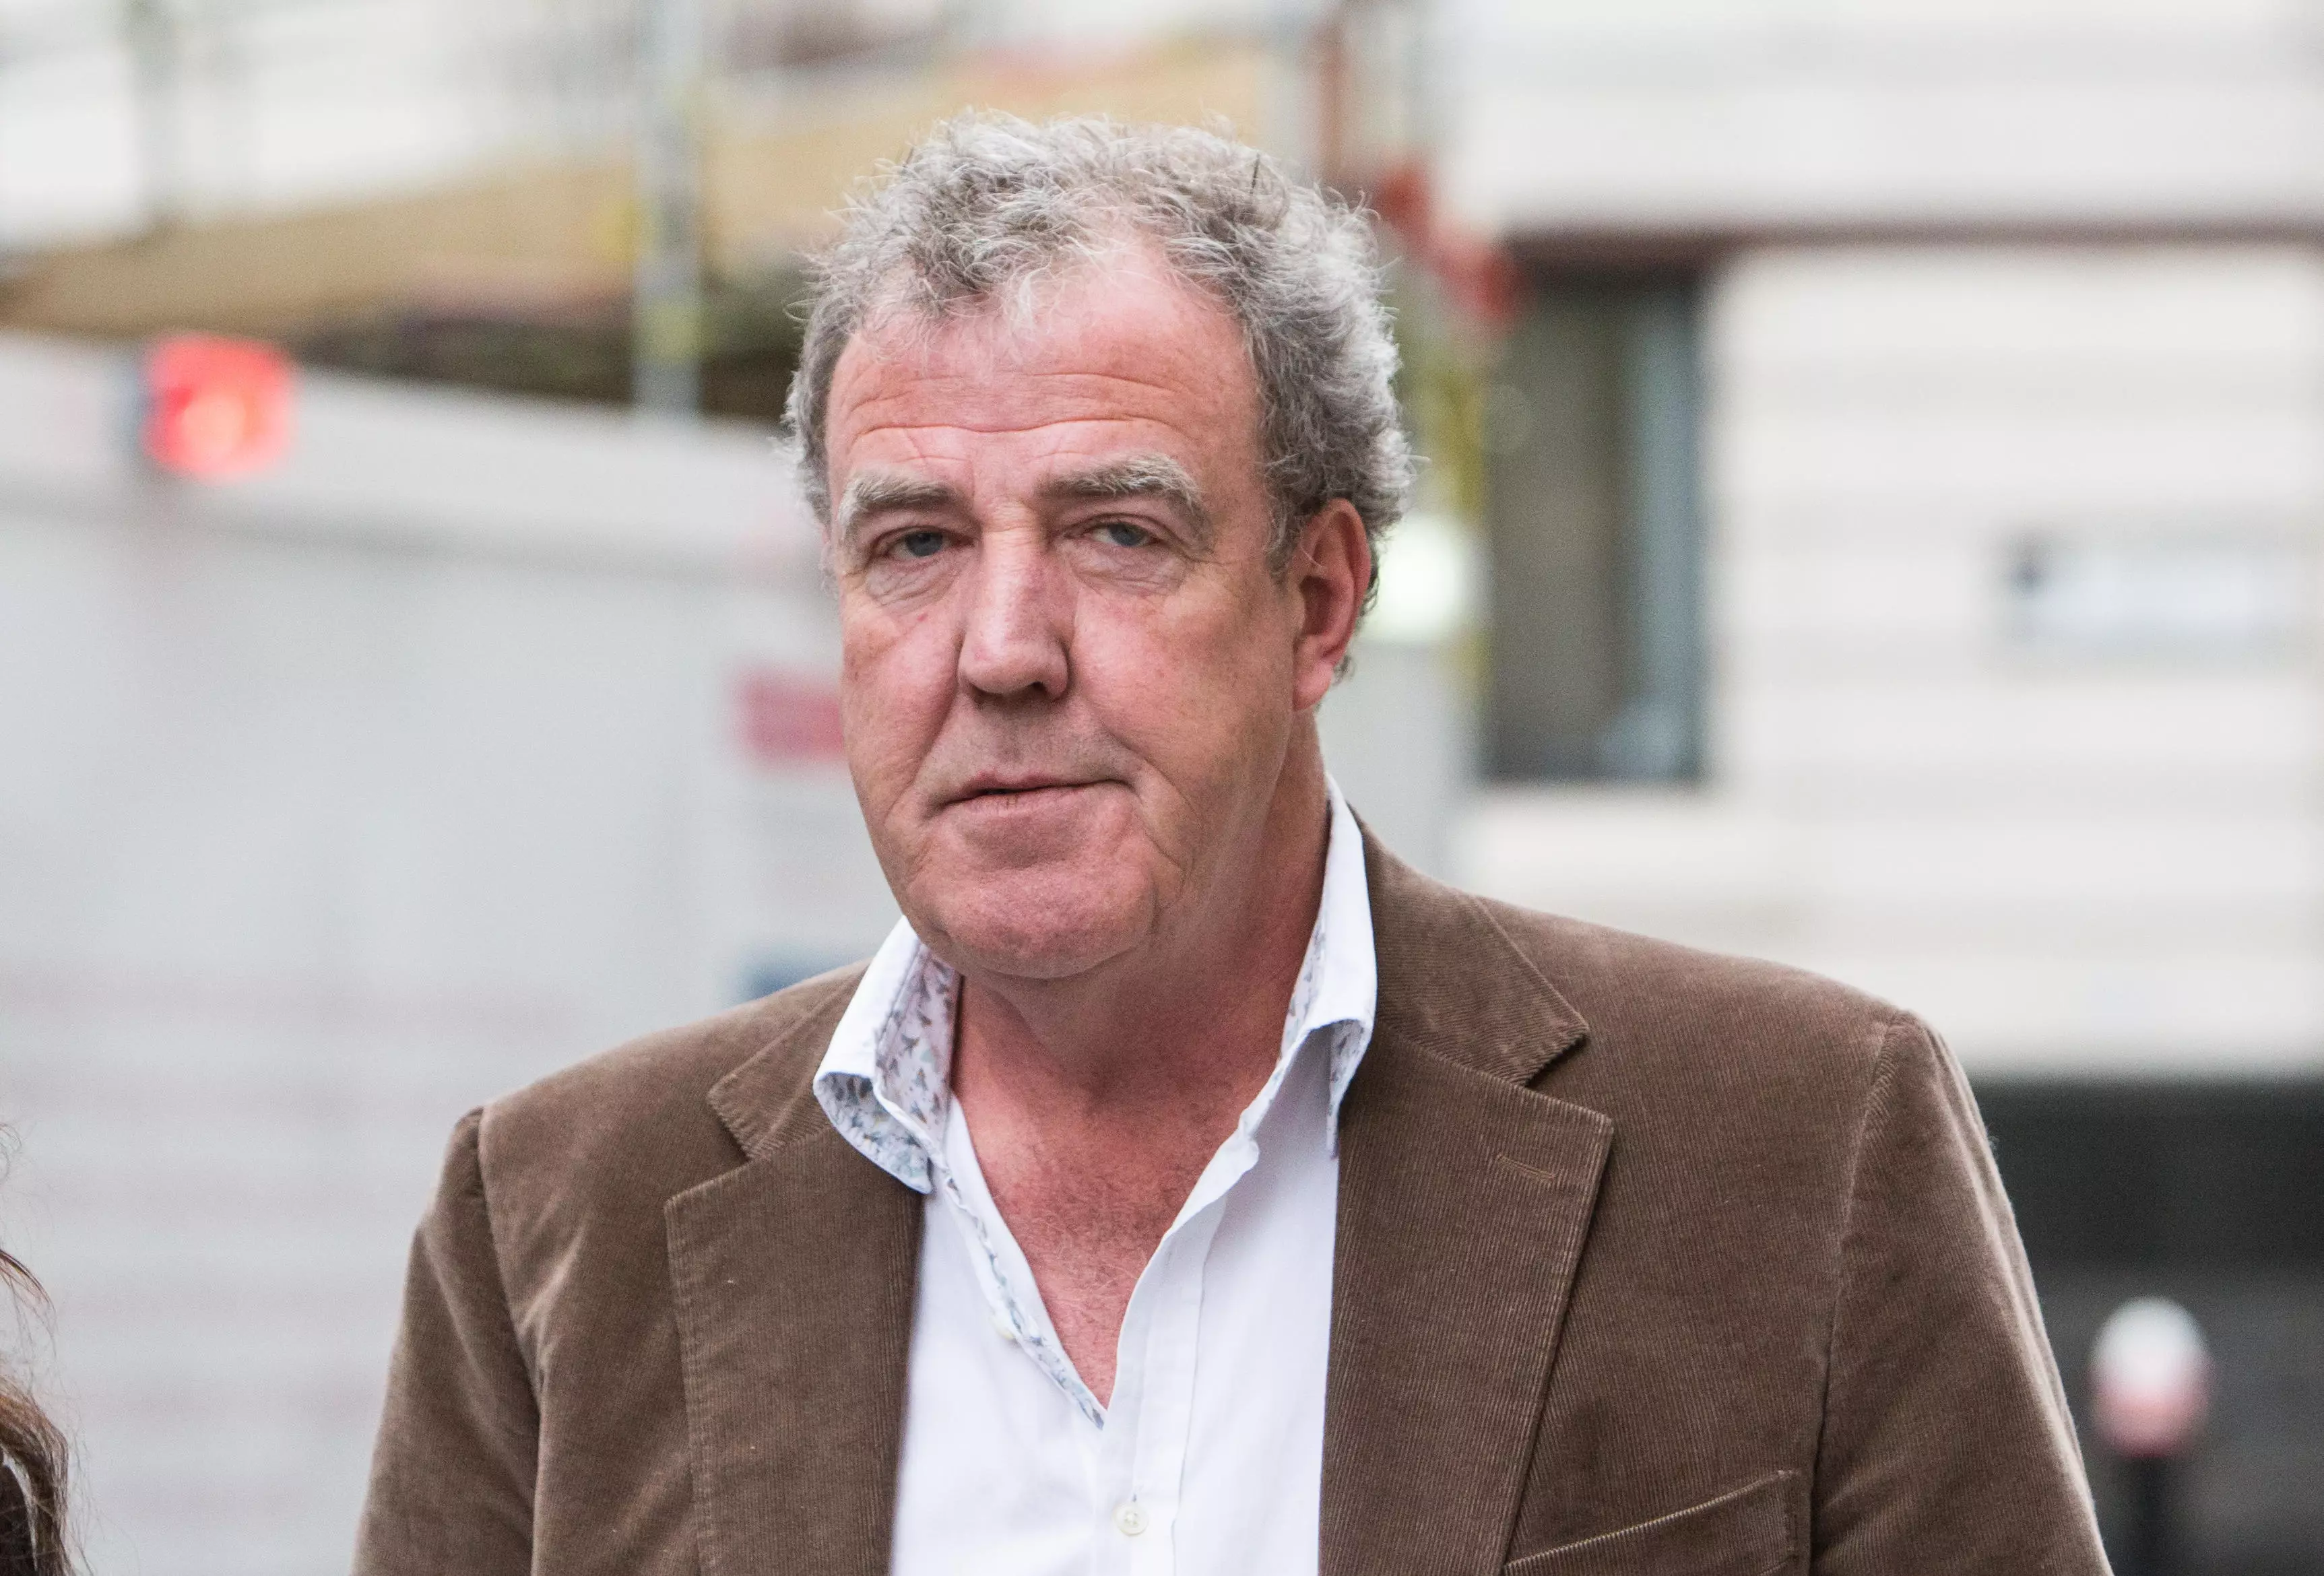 Clarkson said his 999 call did not go as planned.